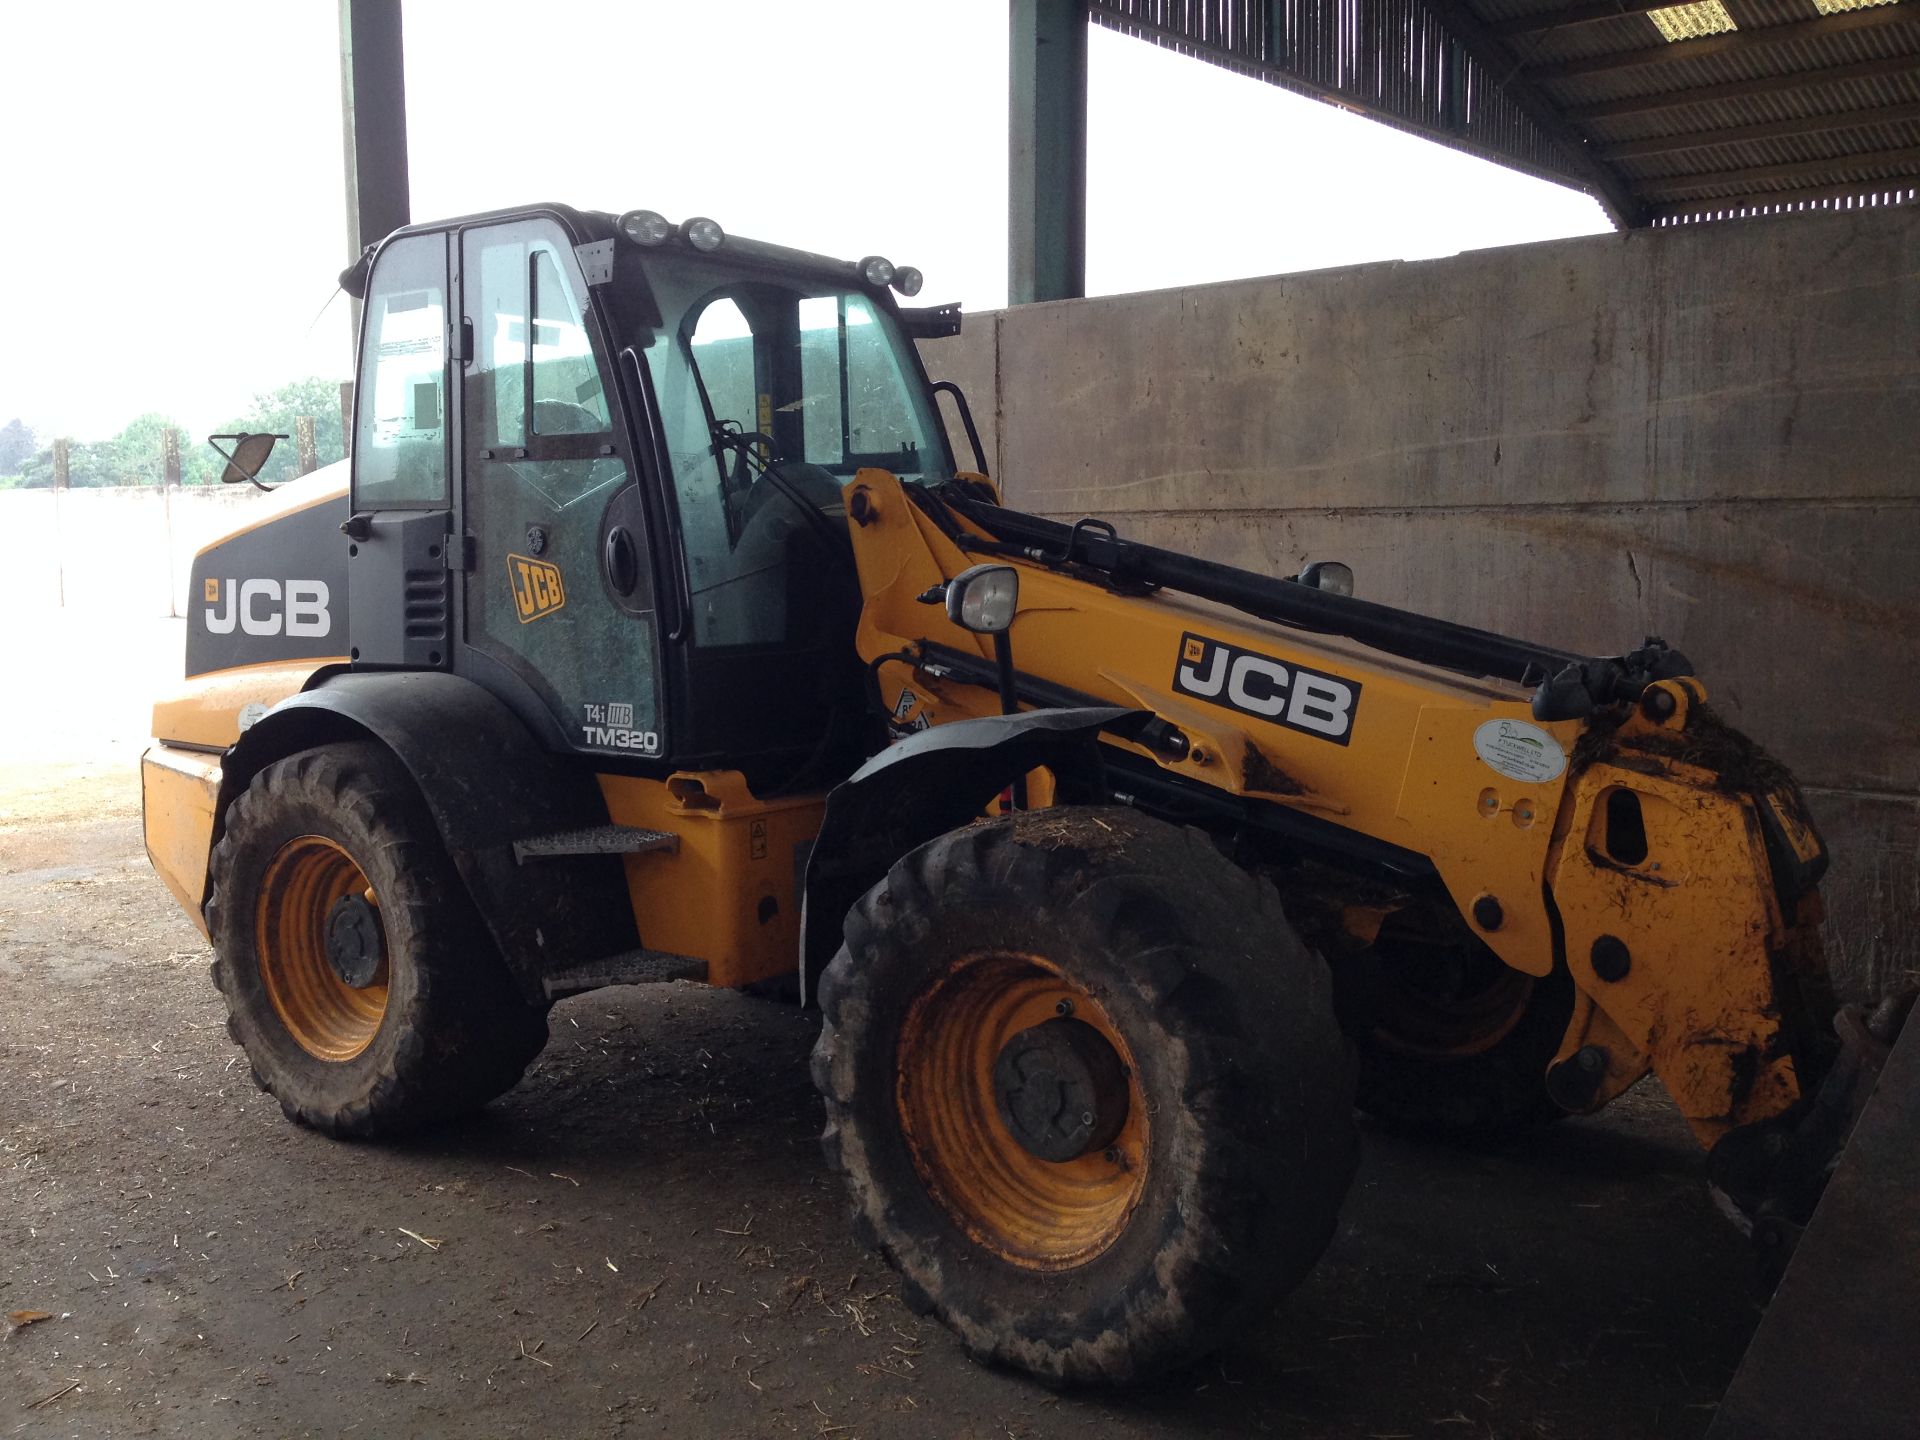 JCB TM320 Agri T4i iiiB, Articulated Loader, Auto Hitch, PUH, Location Diss, Norfolk. - Image 3 of 10